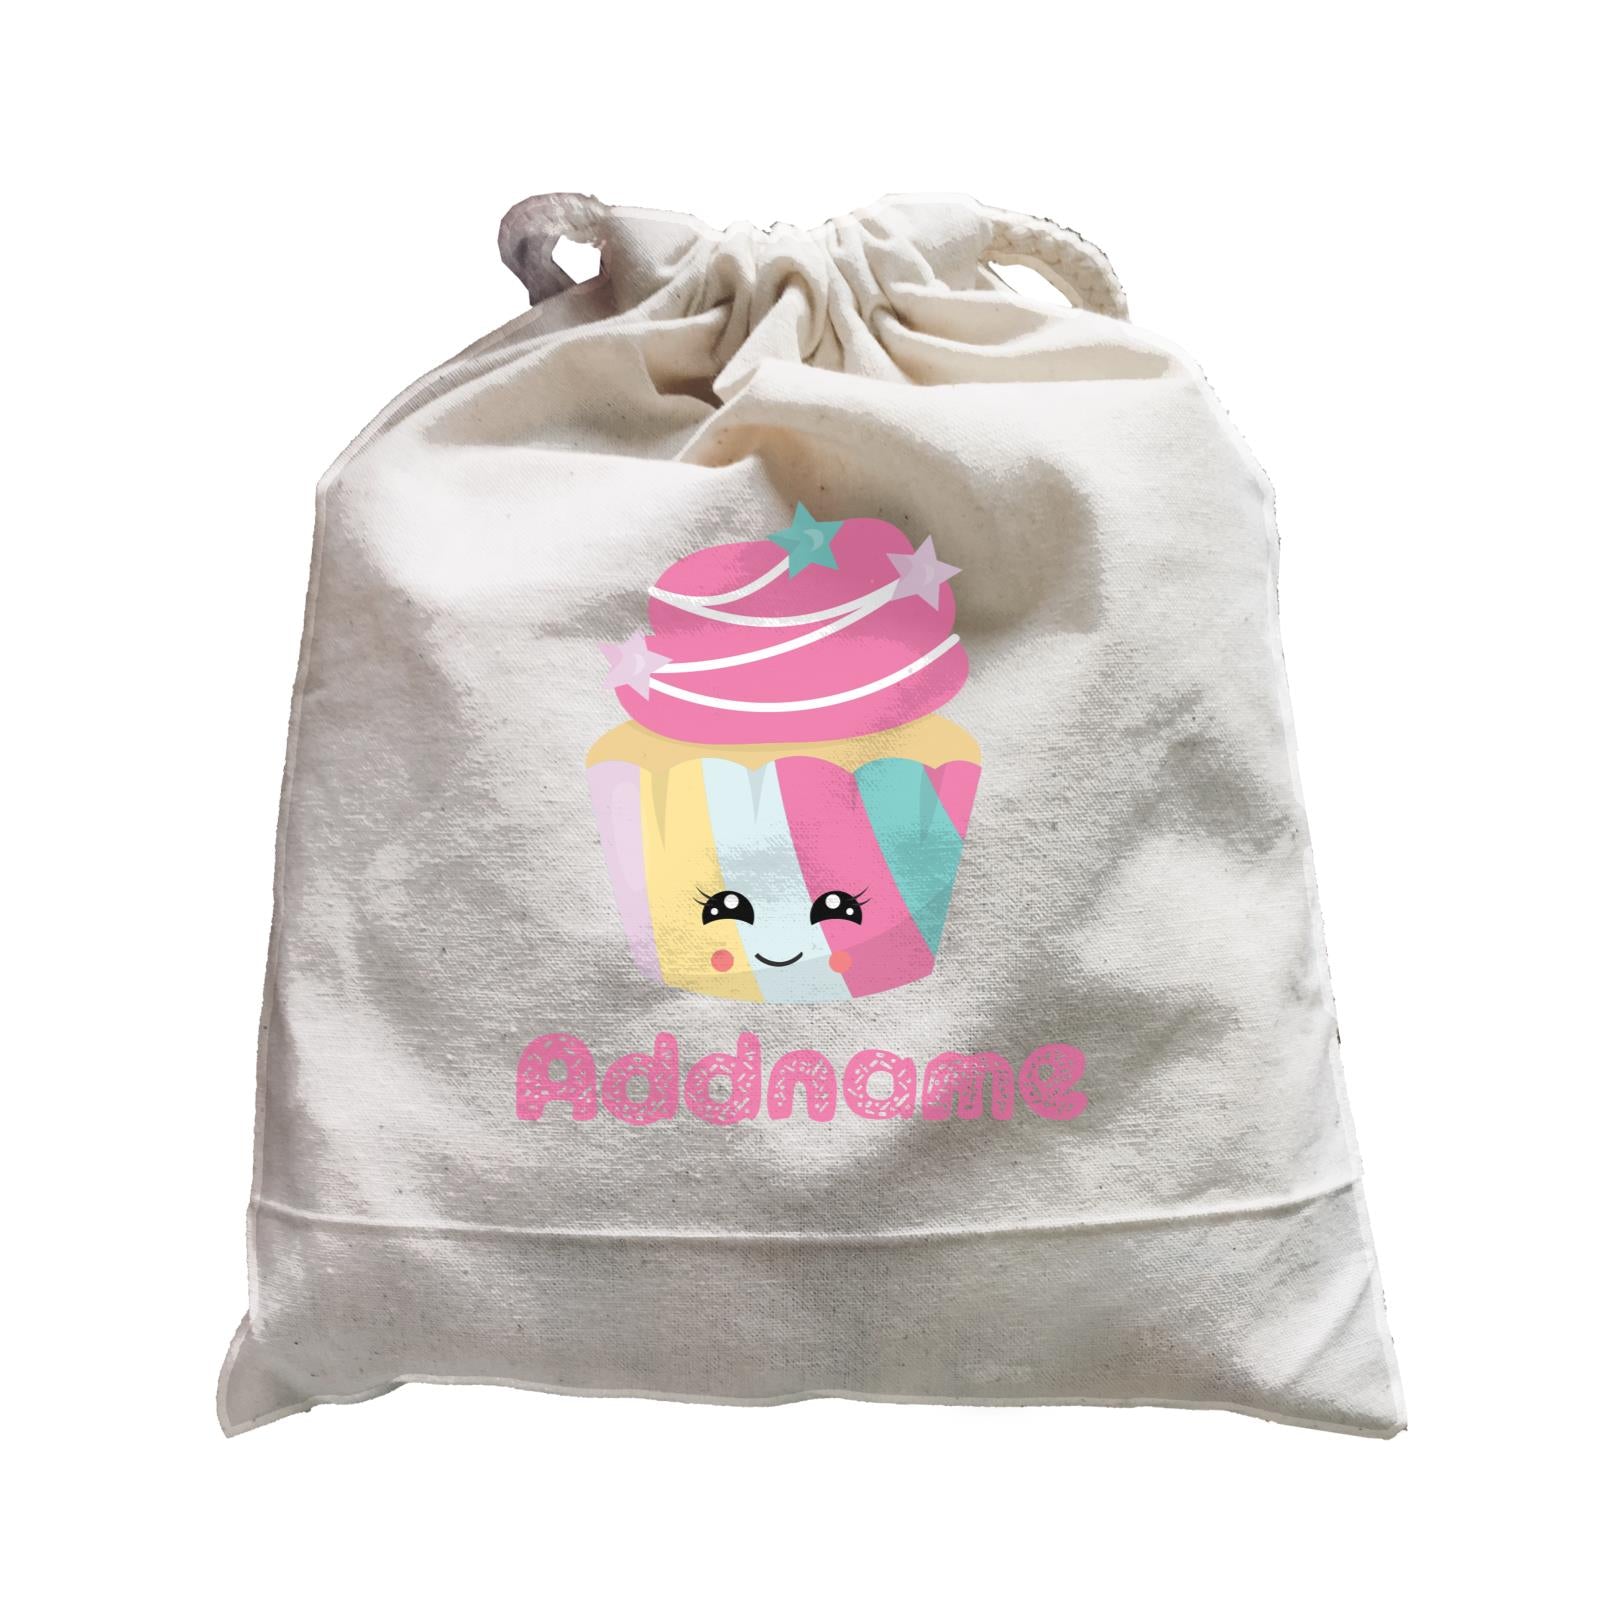 Magical Sweets Pastel Colours Cupcake Addname Satchel